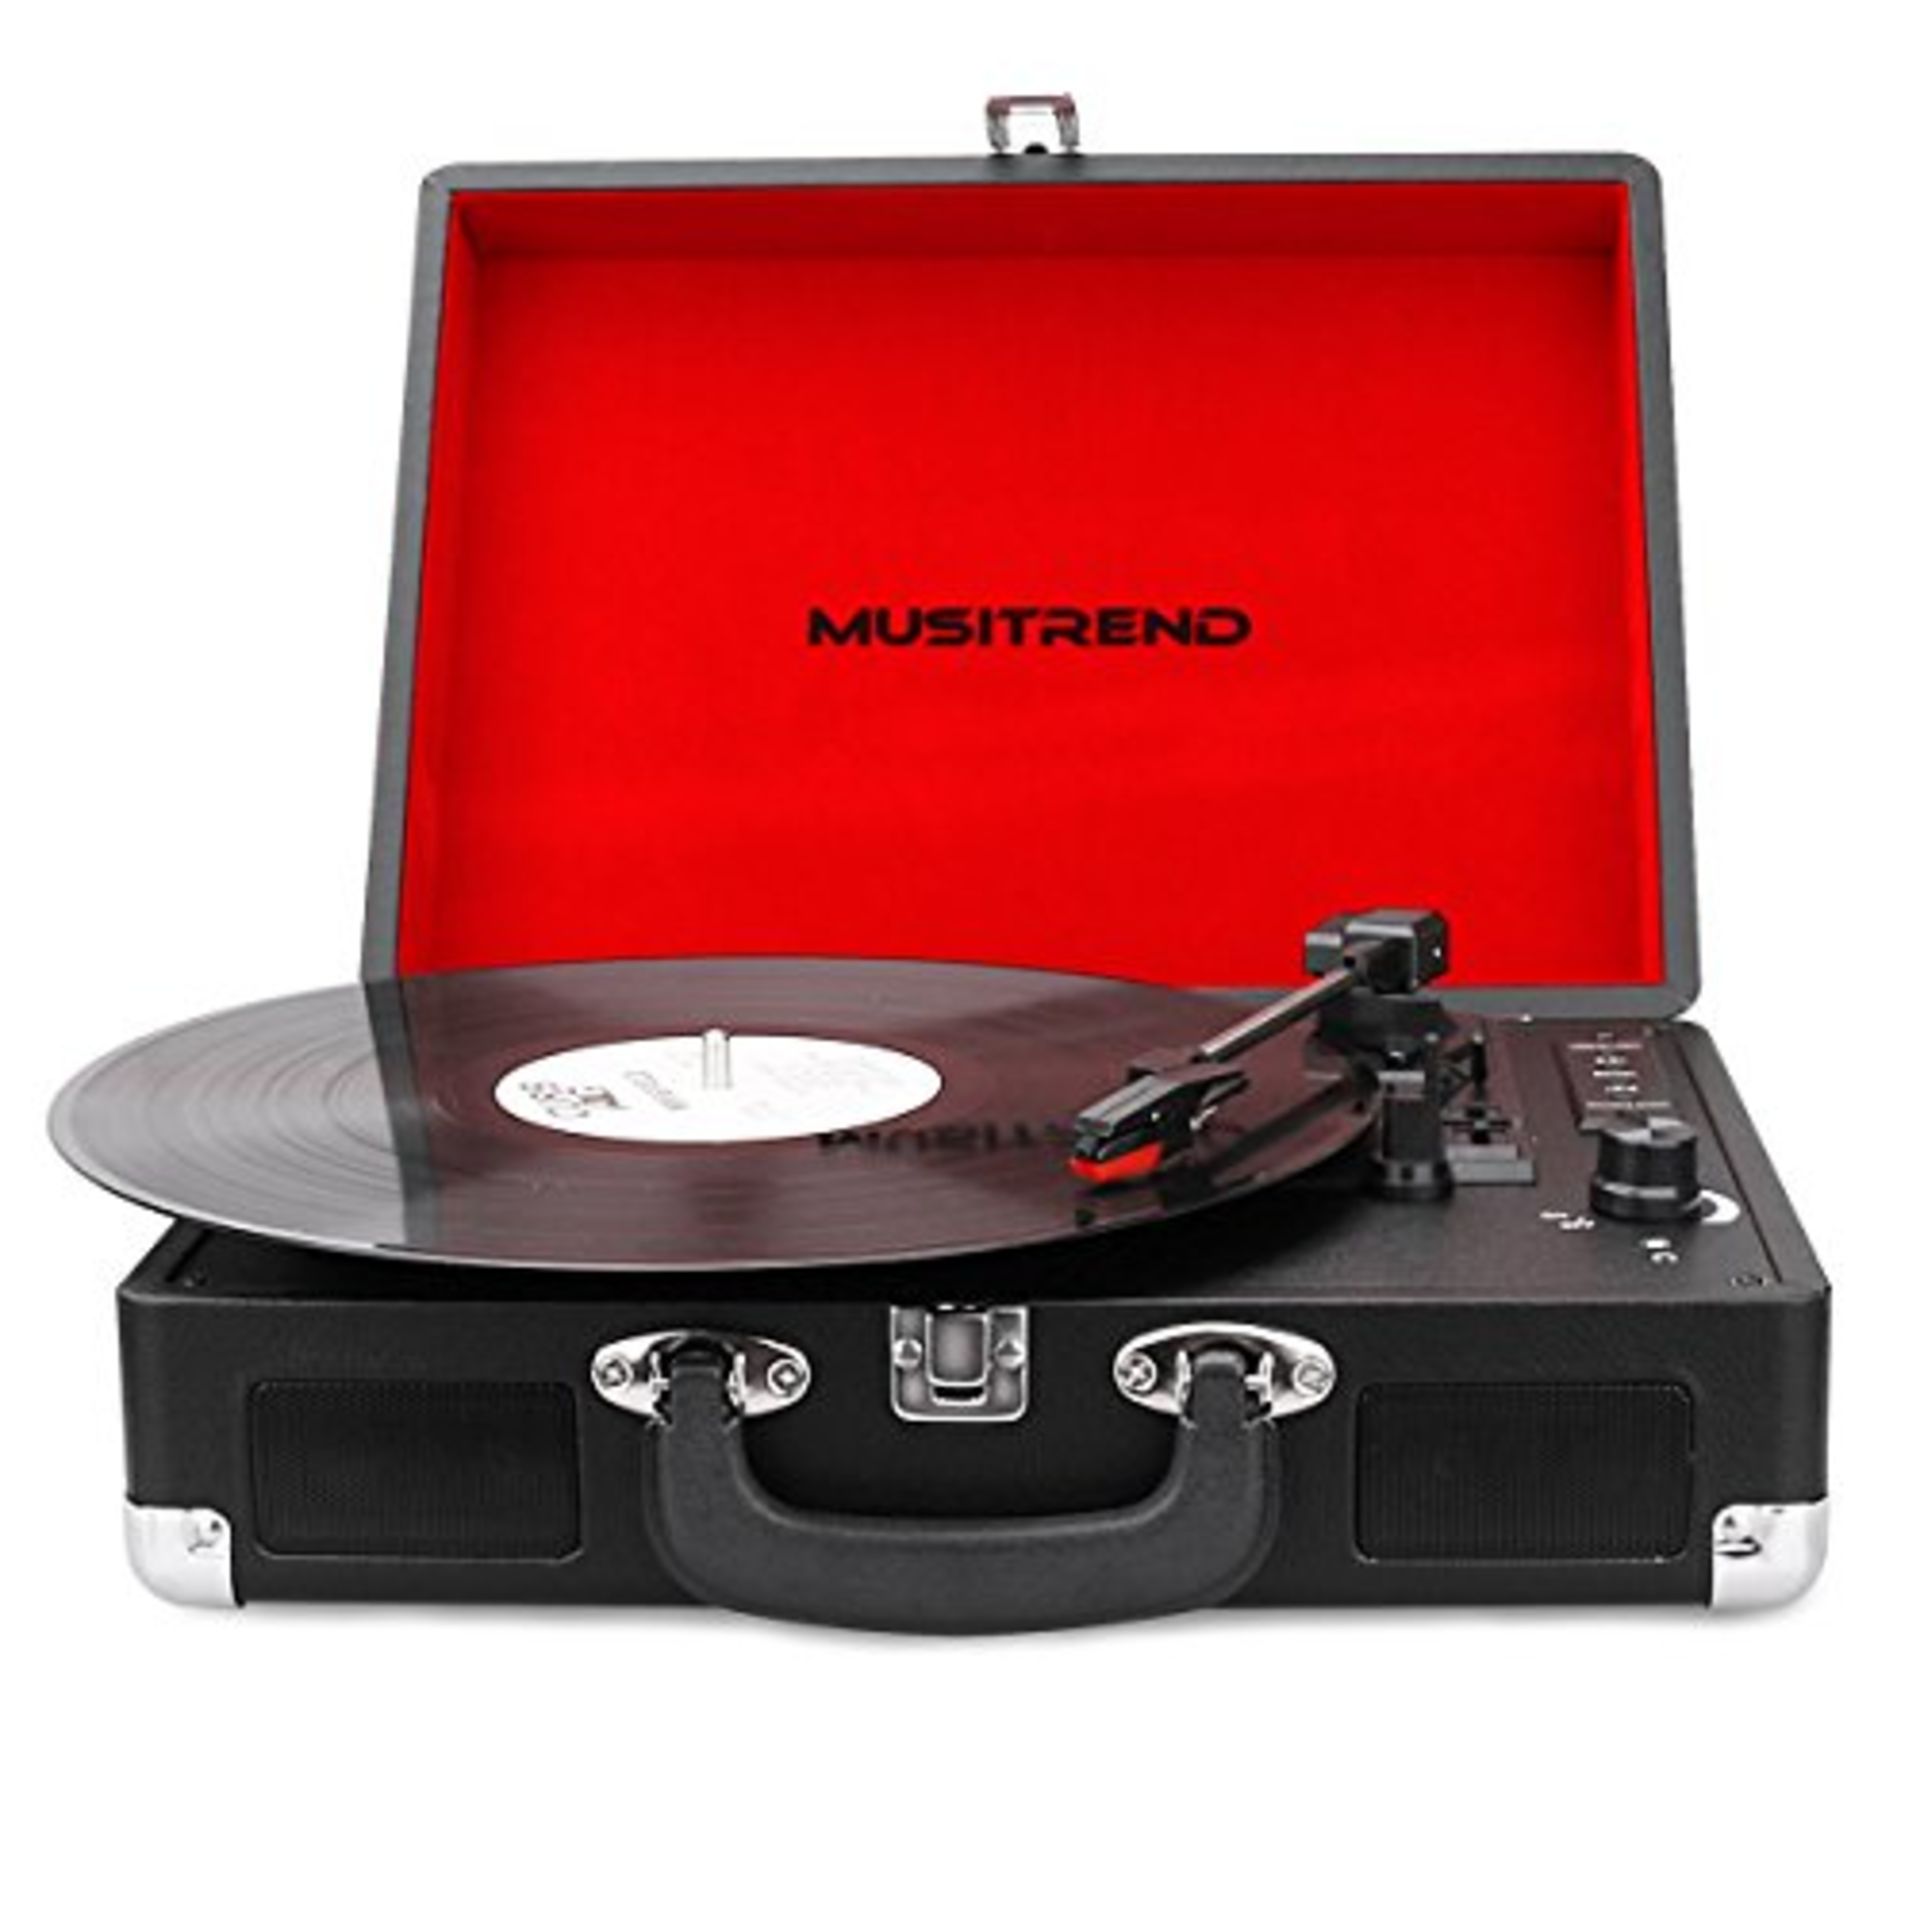 Boxed Brand New Musitrend Vinyl Turntable Record Player RRP £50